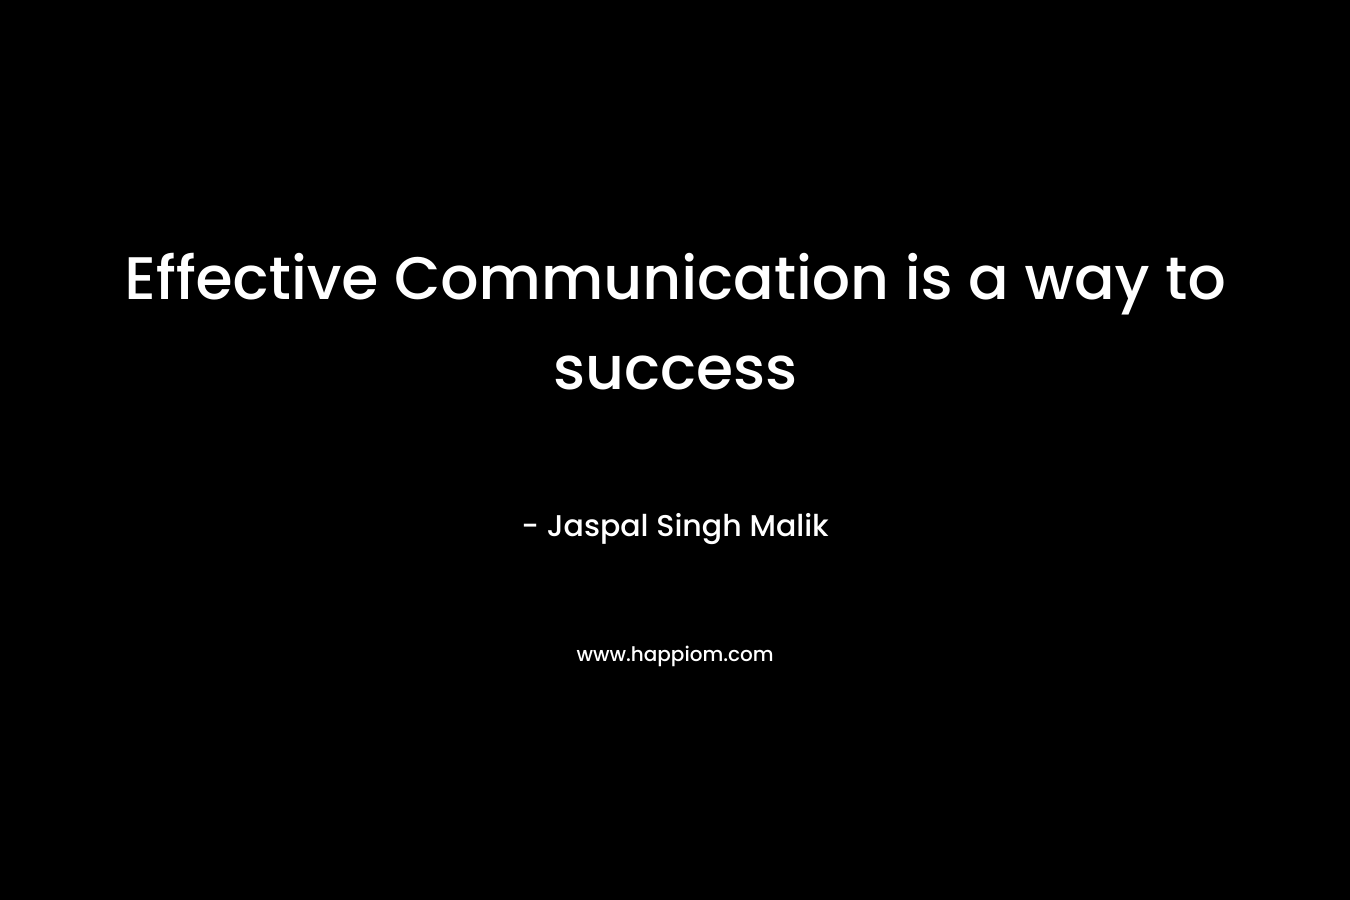 Effective Communication is a way to success